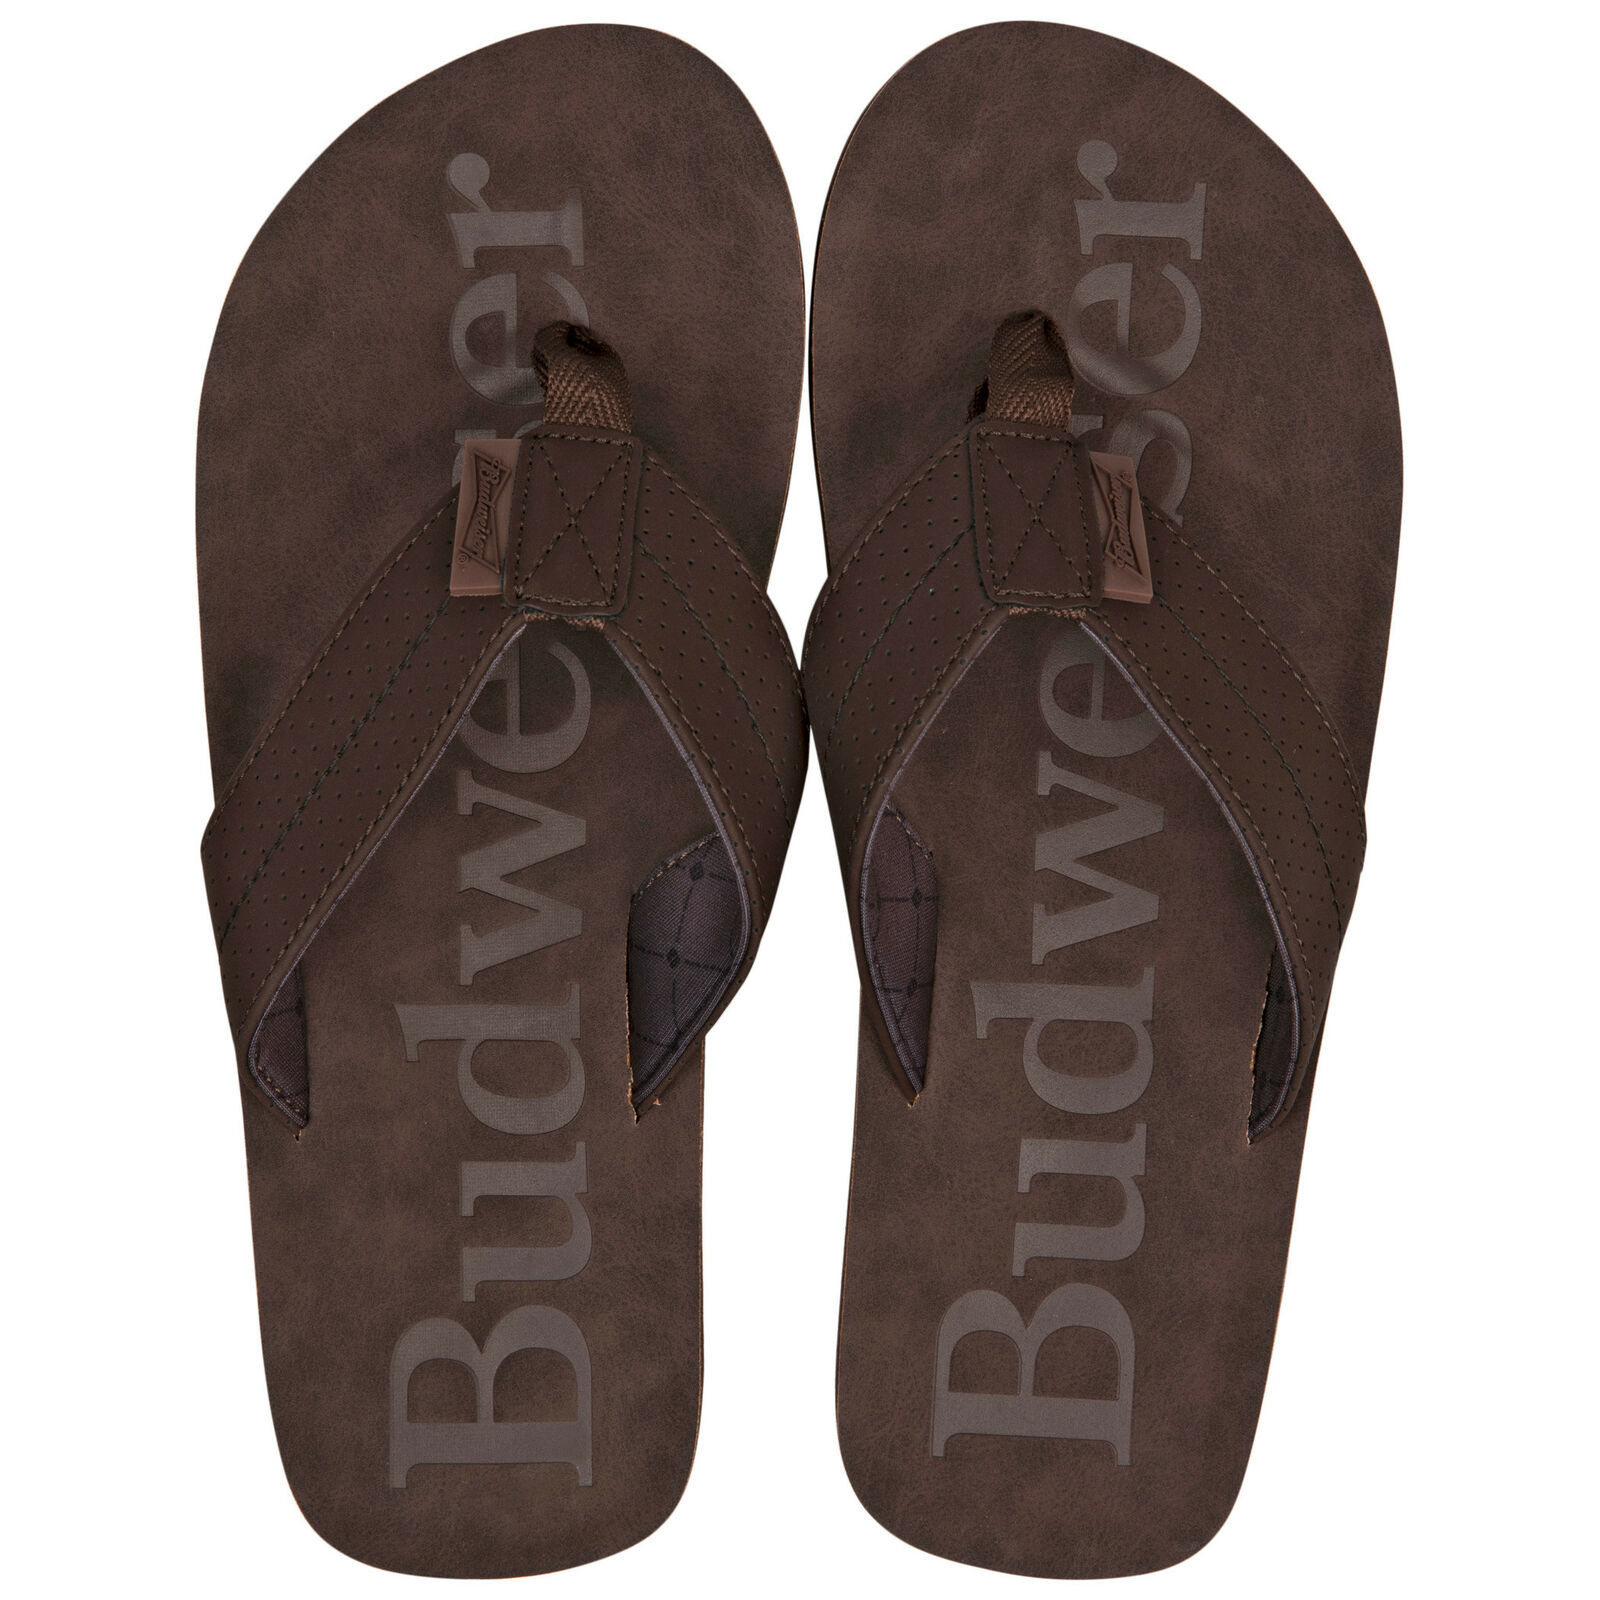 Primary image for Budweiser Printed Brown Distressed Flip Flop Sandals Brown